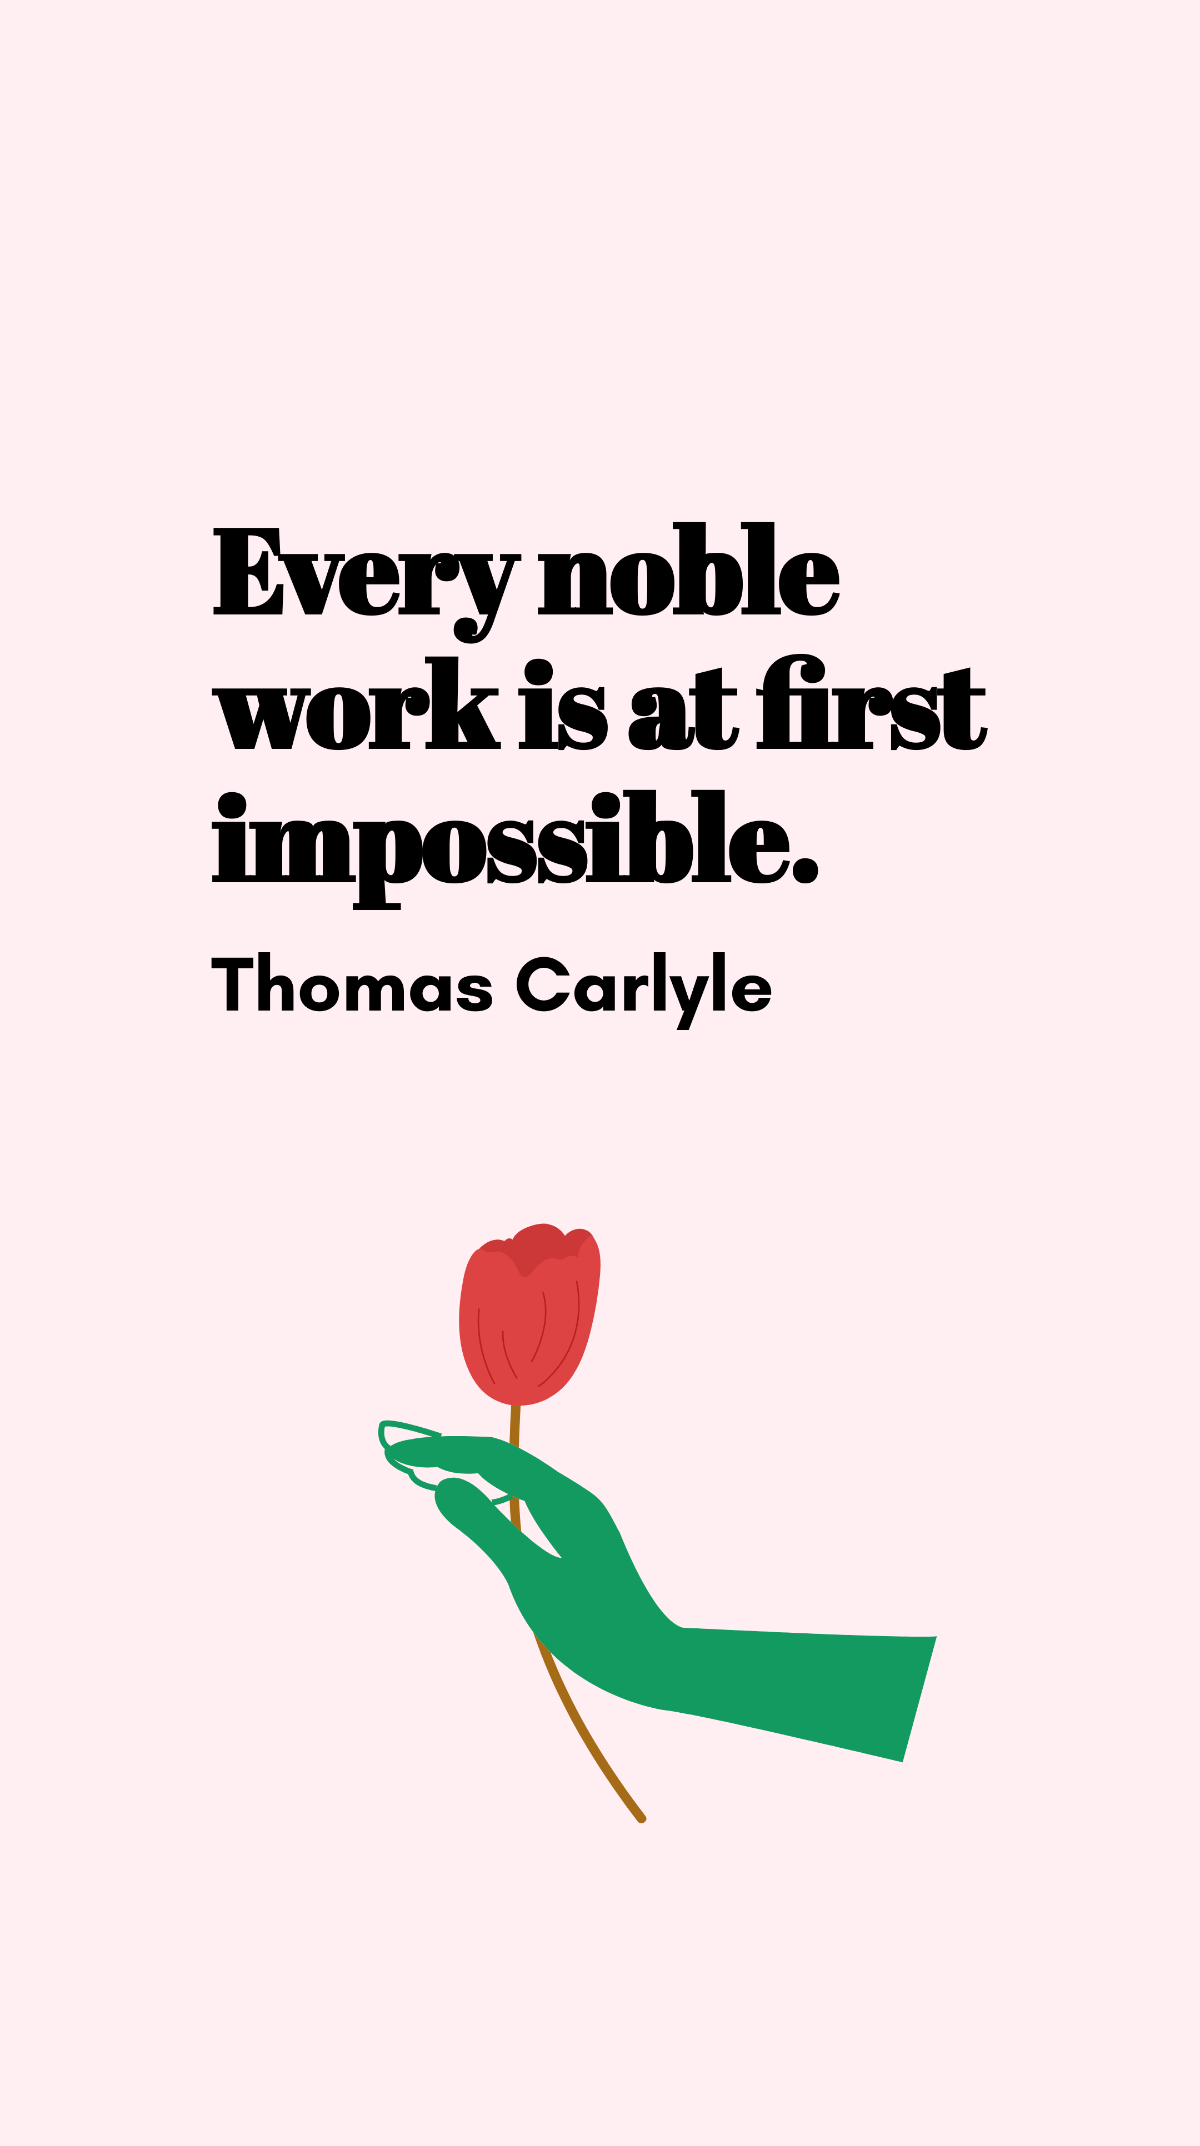 Thomas Carlyle - Every noble work is at first impossible.